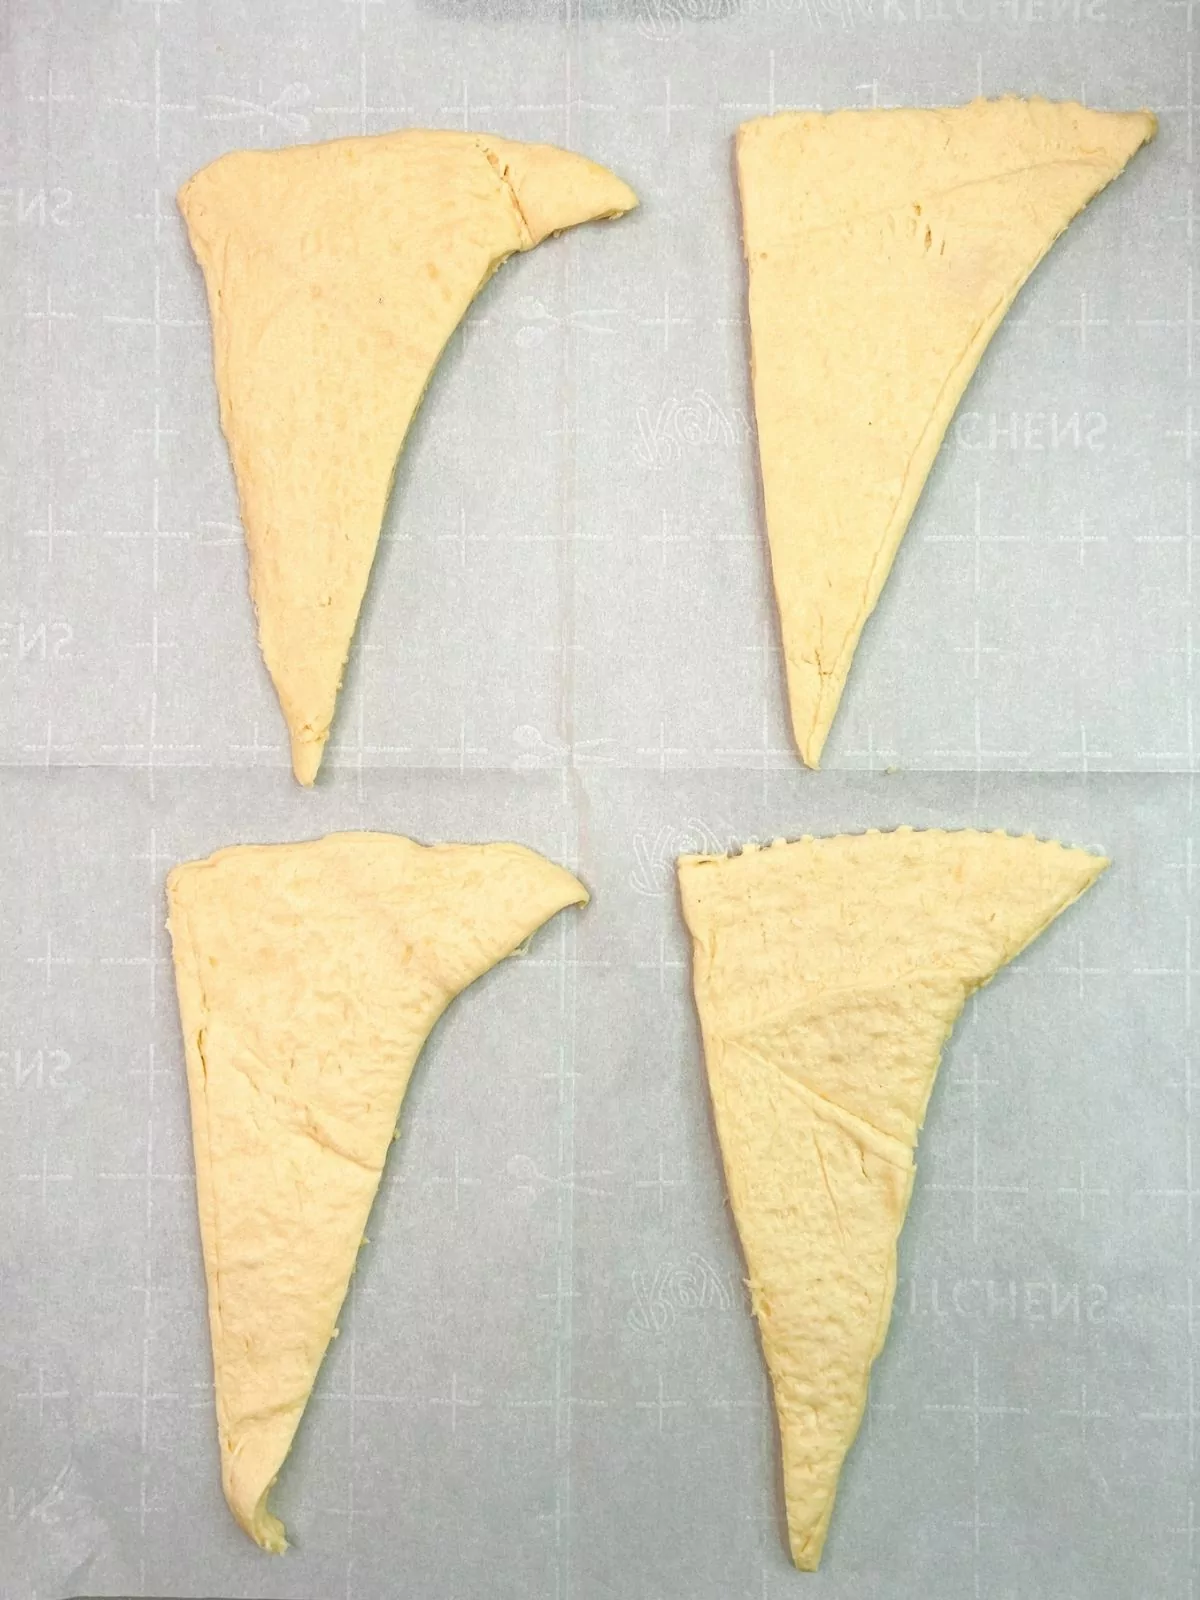 crescent roll triangle dough on parchment paper.